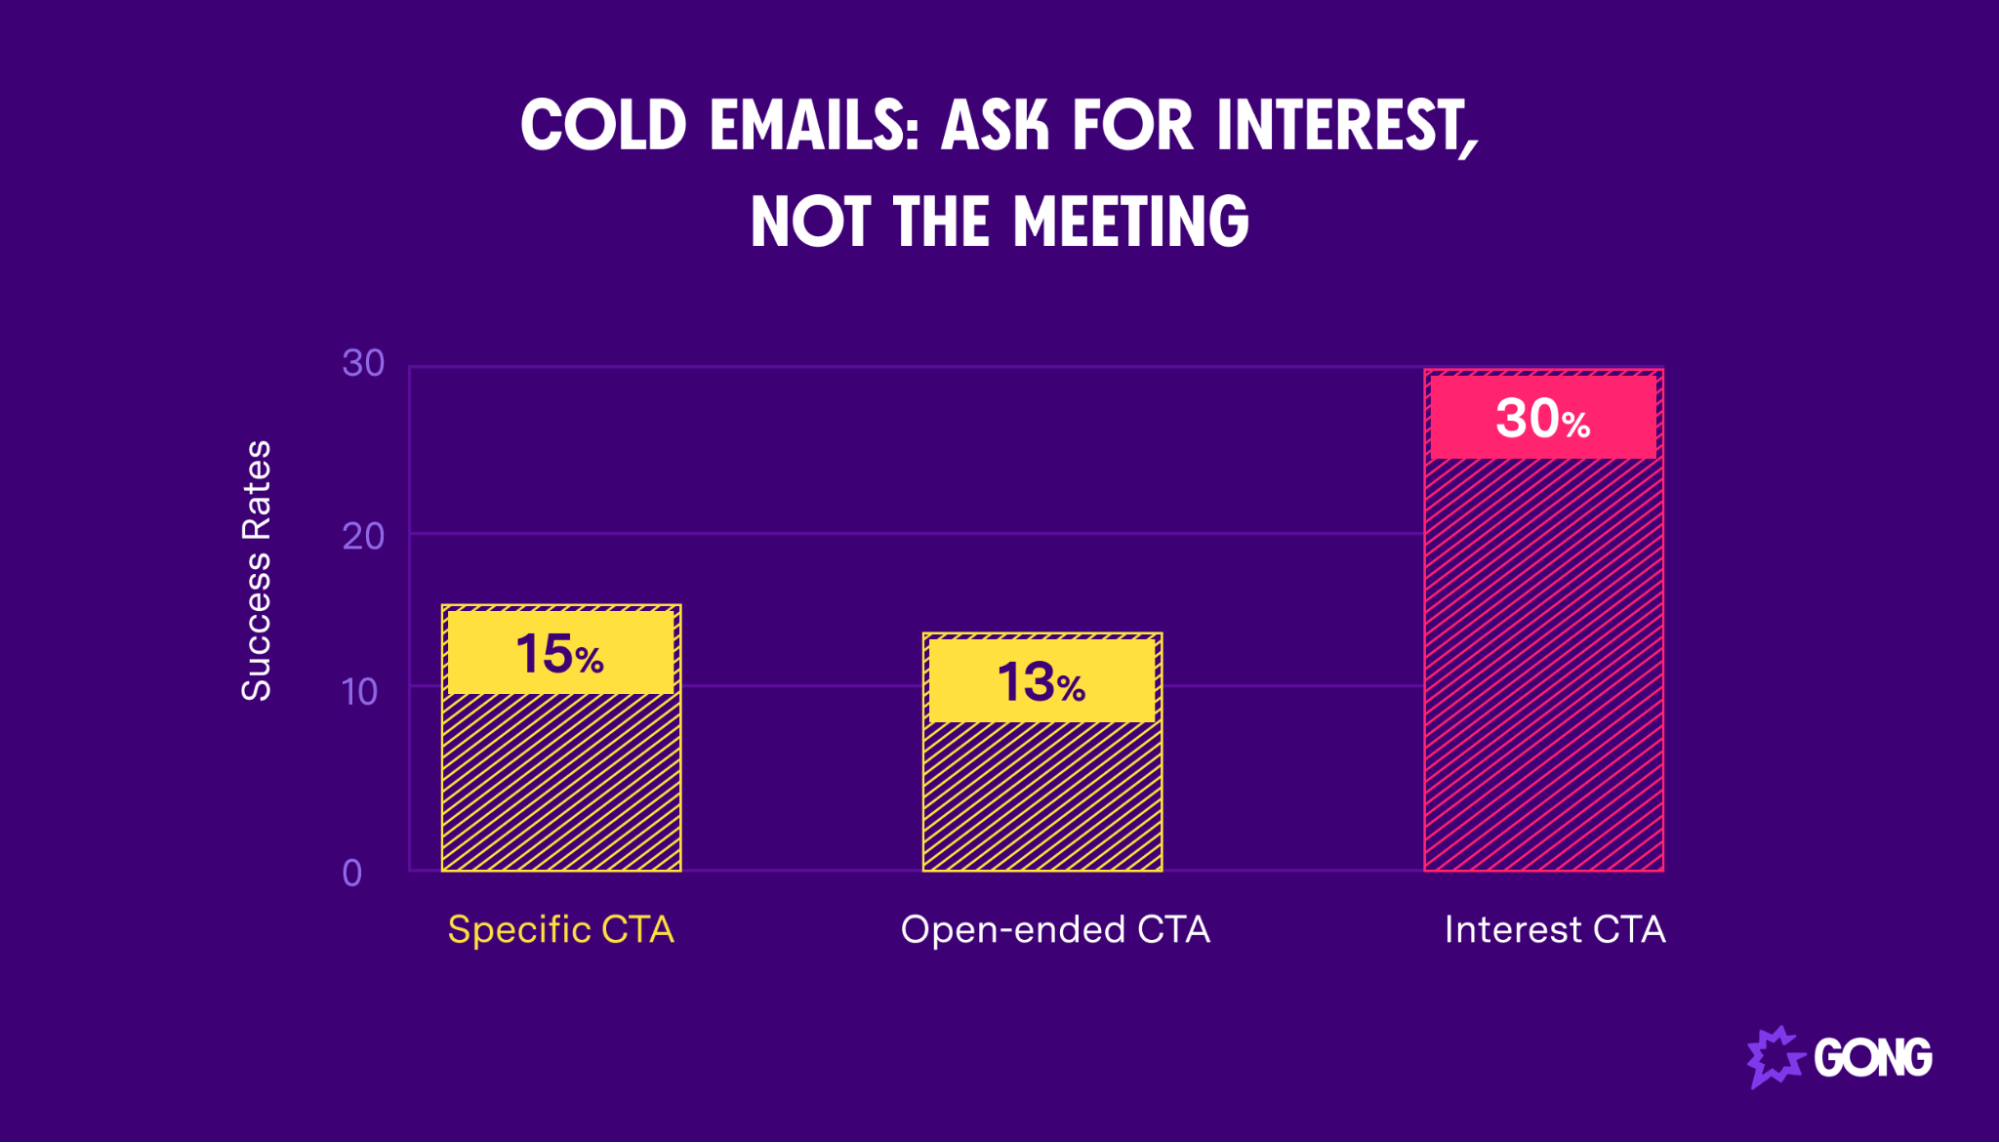 The best email call to action asks for interest